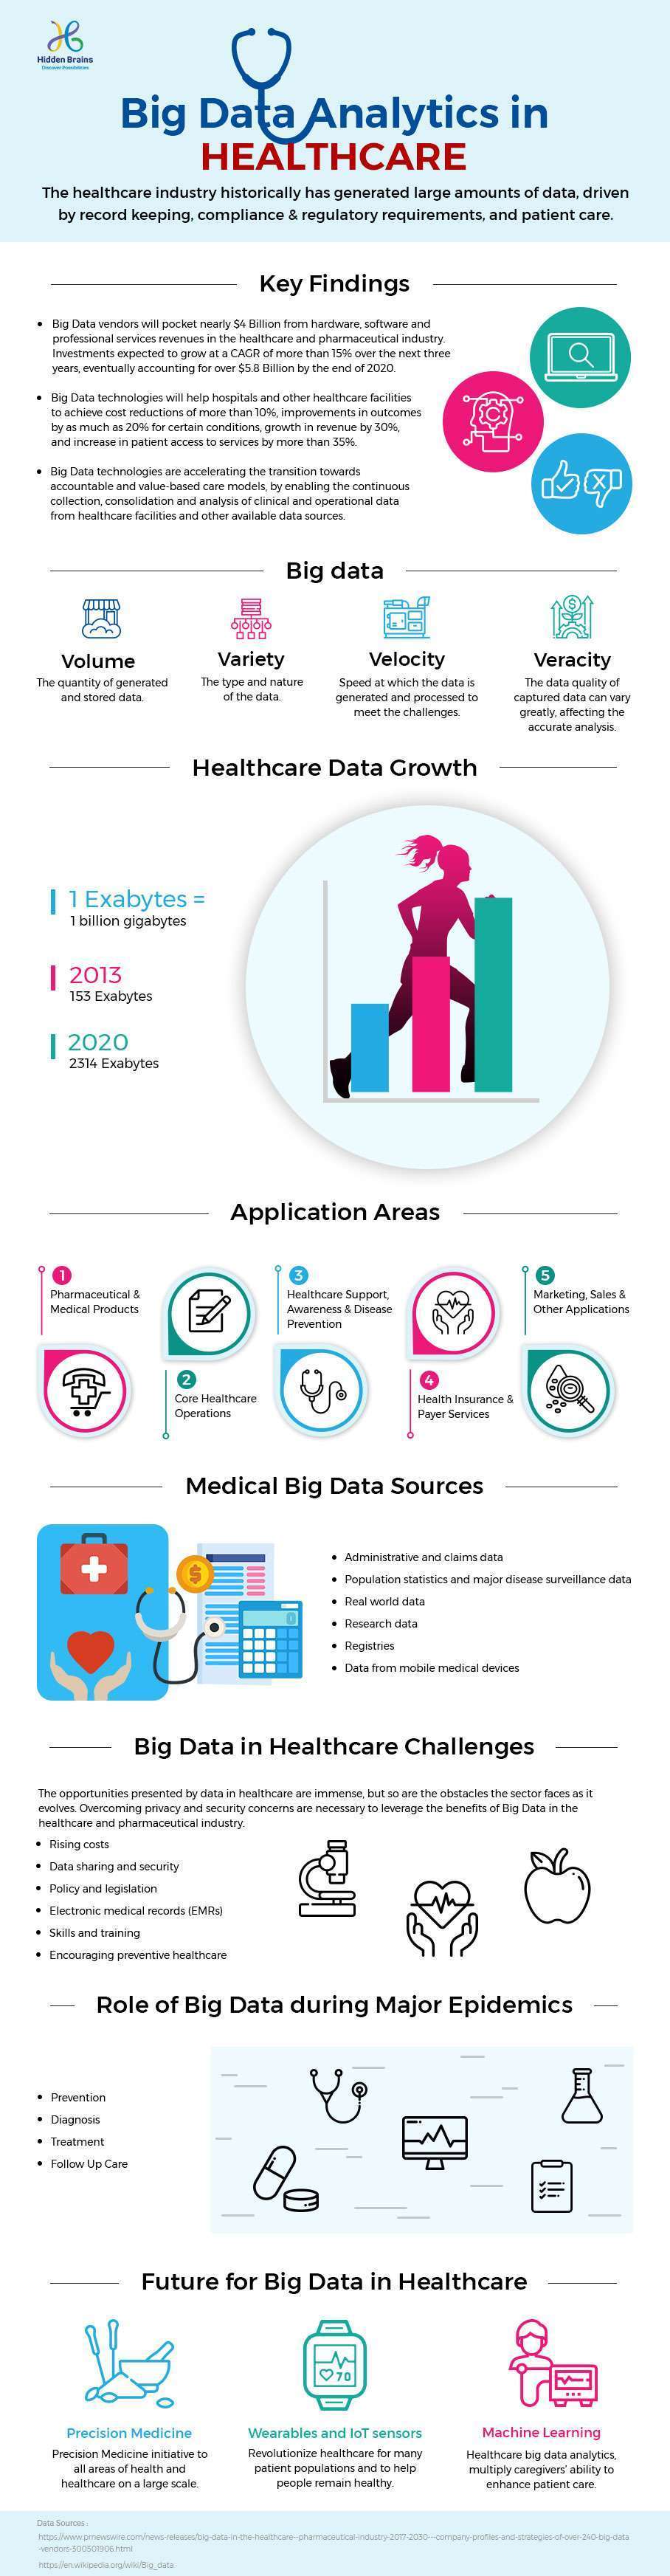 big data solutions in Healthcare Industry